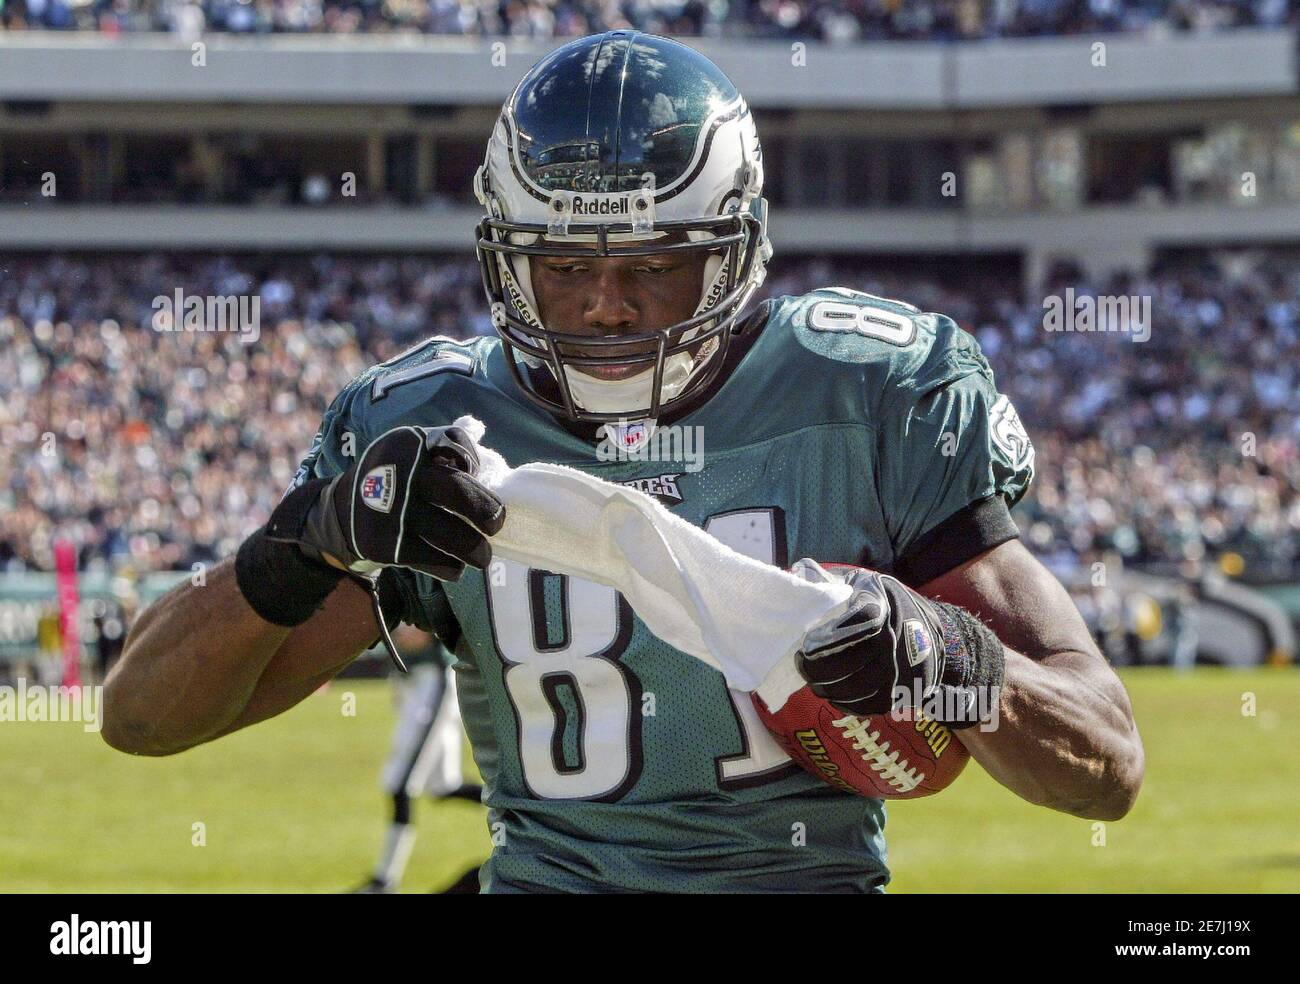 Philadelphia Eagles wide receiver Terrell Owens pulls a towel from his  uniform for a celebration after scoring his 100th career touchdown against  the San Diego Chargers in Philadelphia in this October 23,